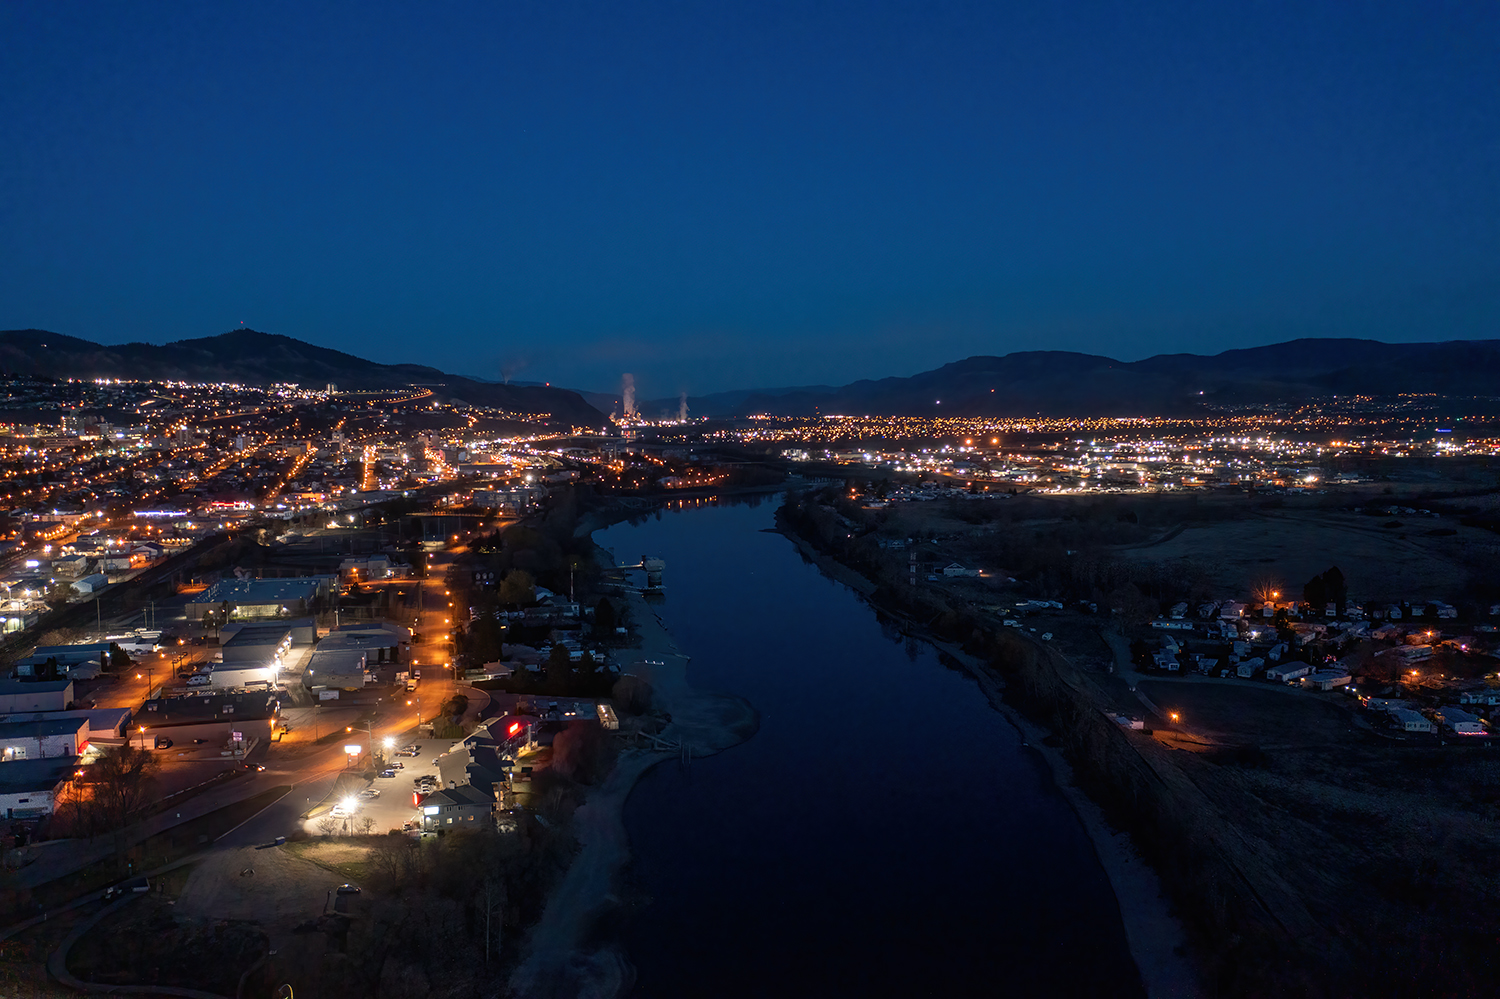 Kamloops City Aerial nighttime view with lights and road enhanced